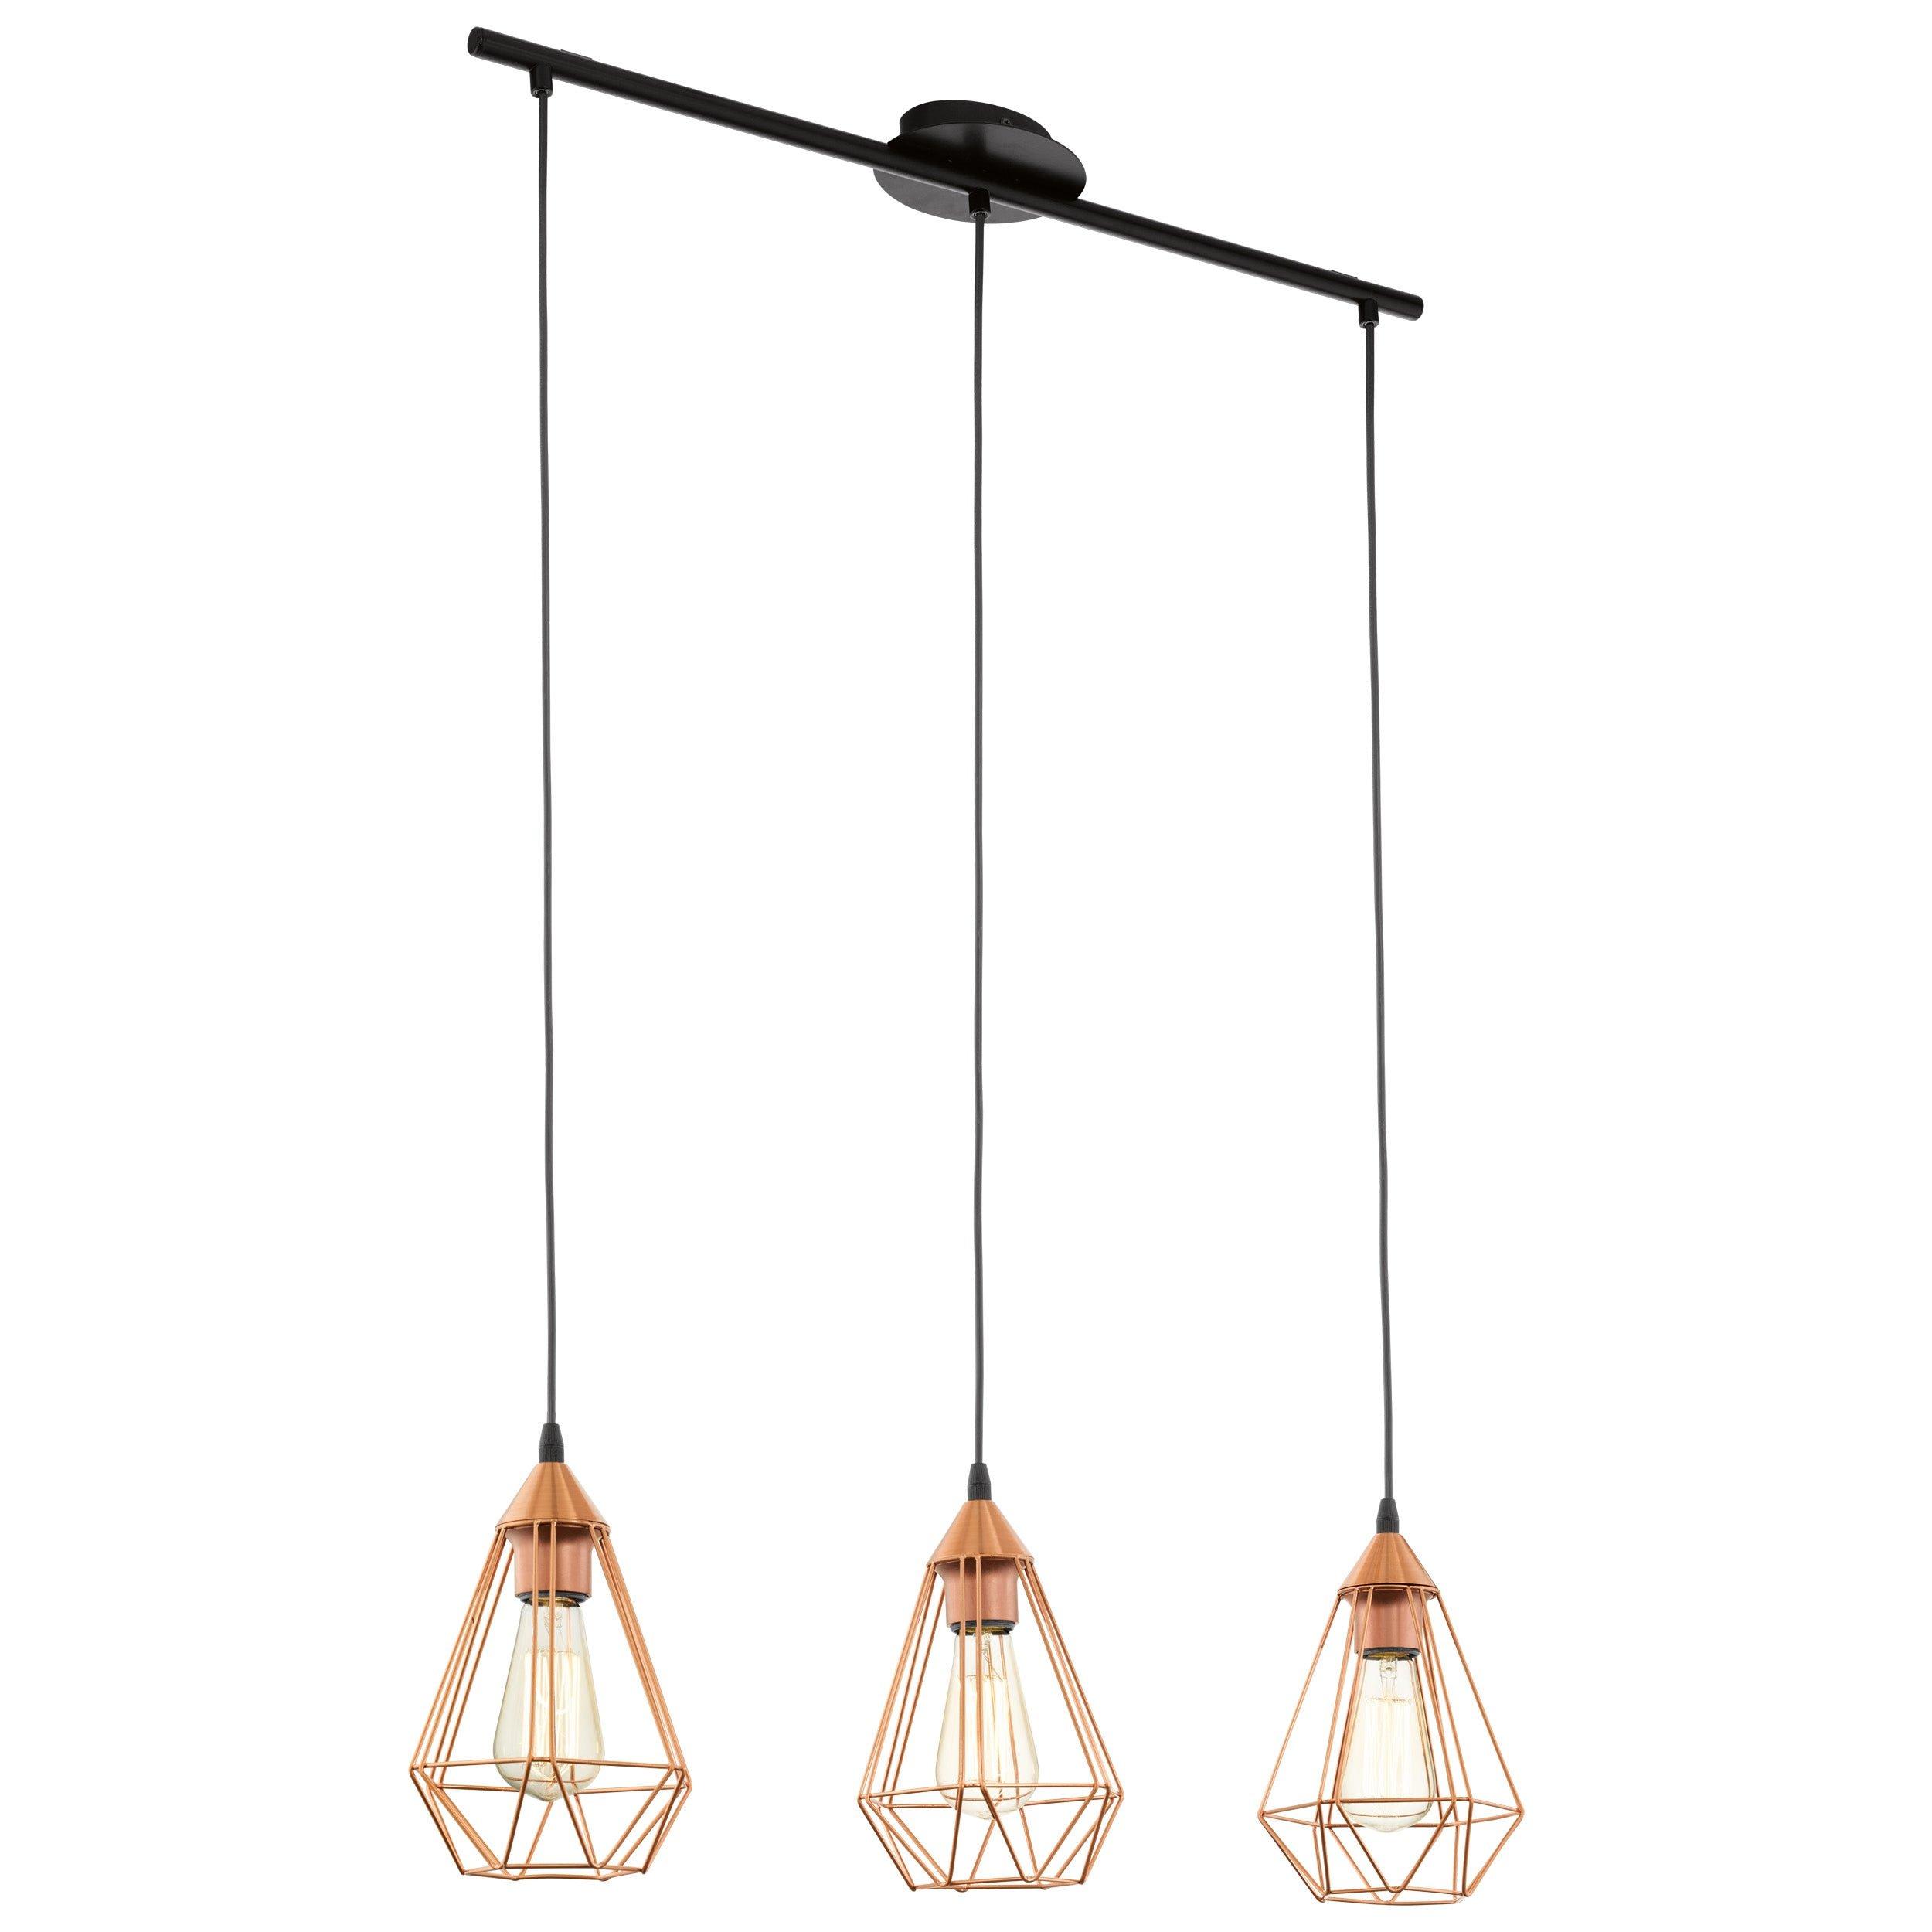 Hanging Ceiling Pendant Light Copper Wire Cage 3x E27 Kitchen Island Feature